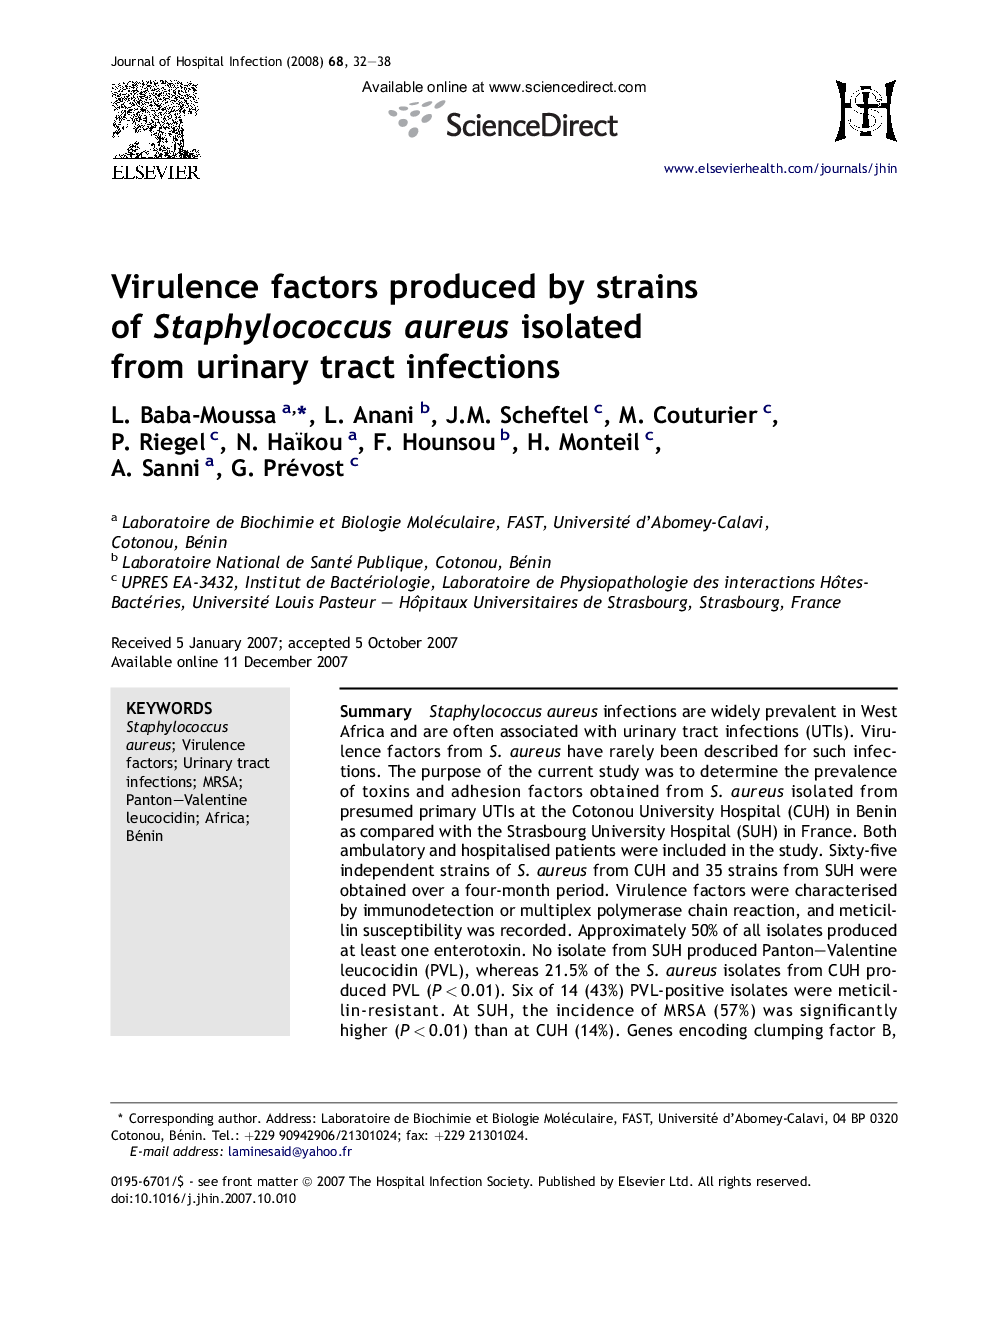 Virulence factors produced by strains of Staphylococcus aureus isolated from urinary tract infections